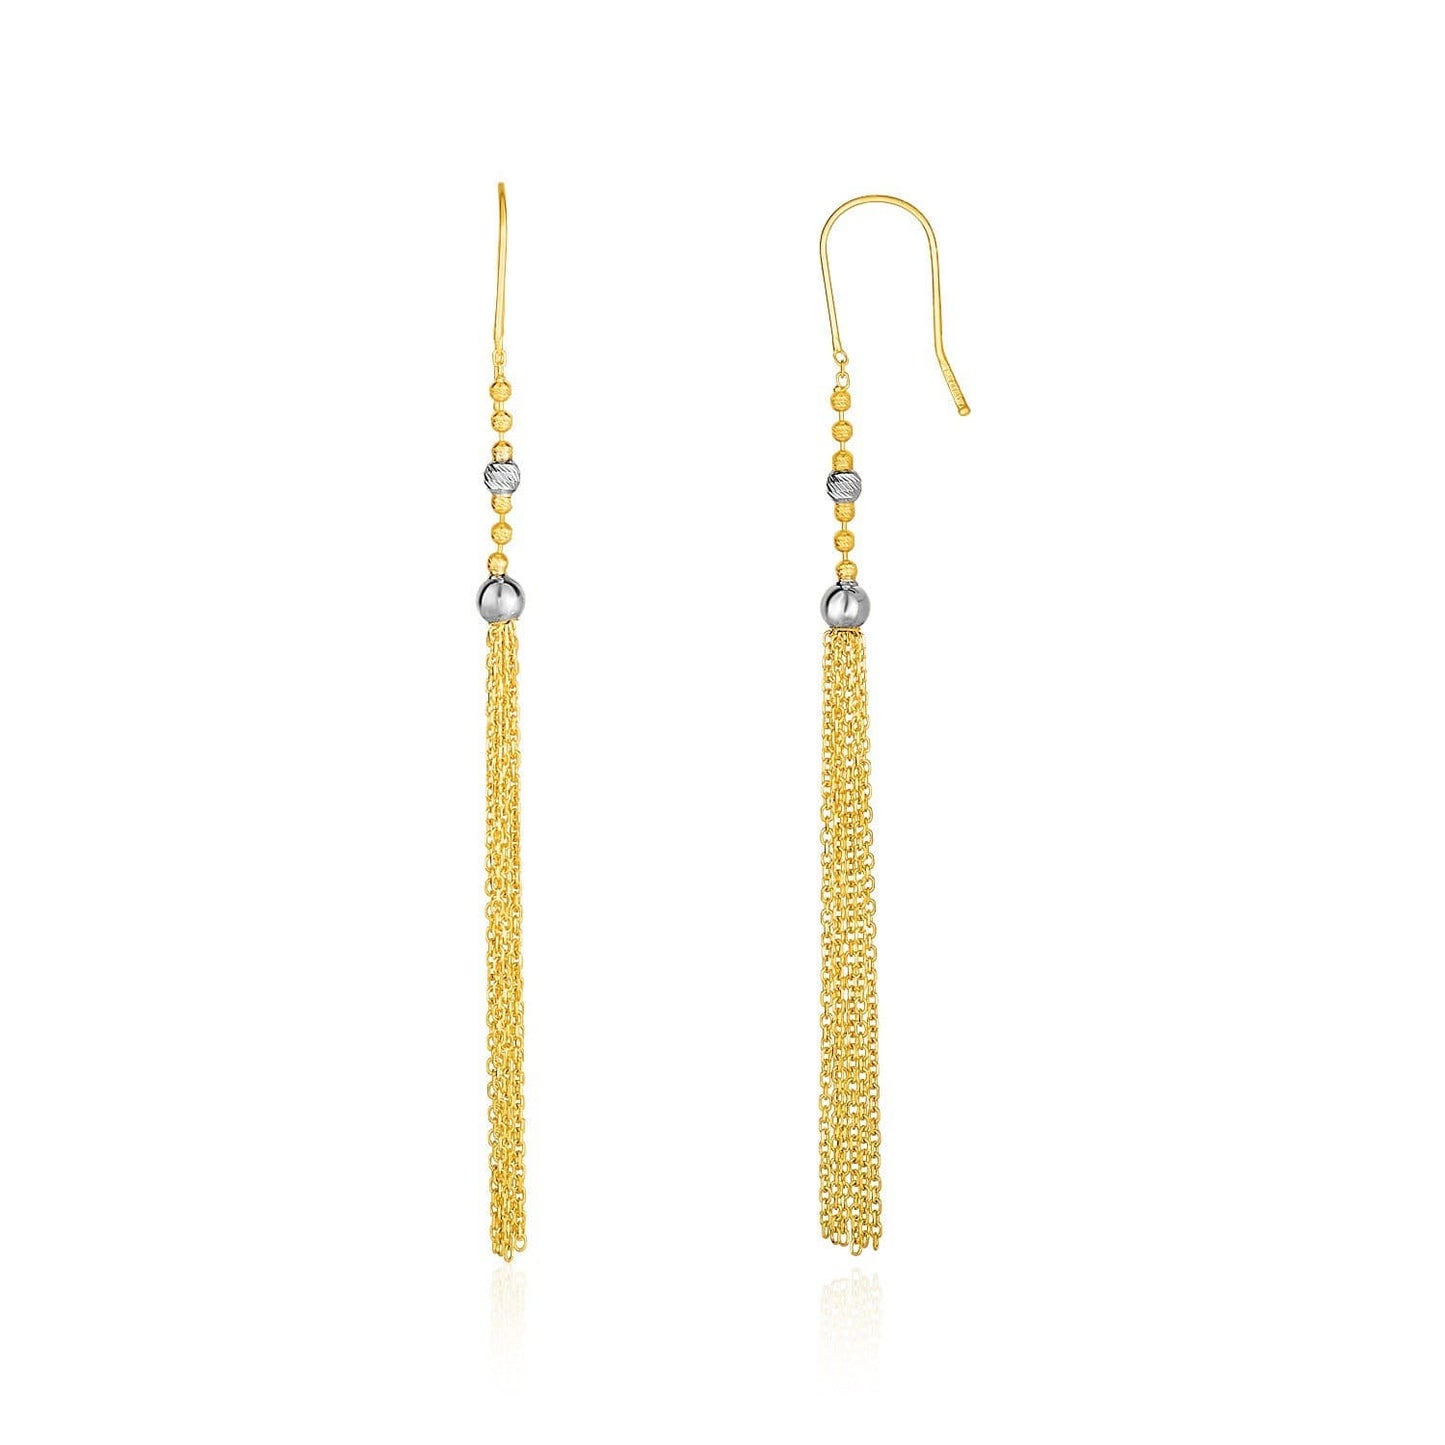 14k Two-Tone Yellow and White Gold Ball and Multi-Strand Tassel Earrings